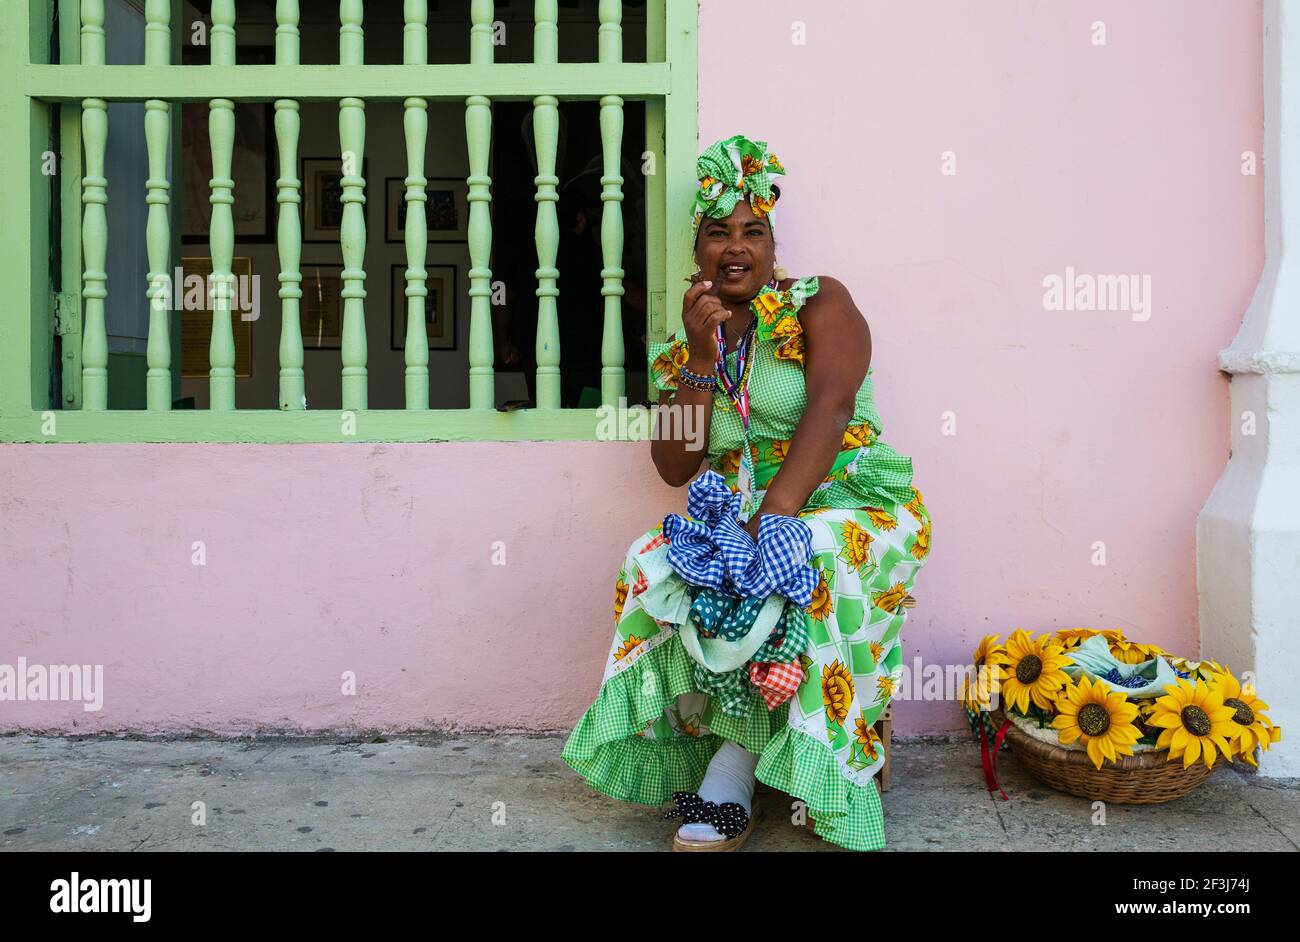 Some women in Habana Vieja wear beautifully coloured dresses and for some money readily pose for photographs, Havana, Cuba Stock Photo